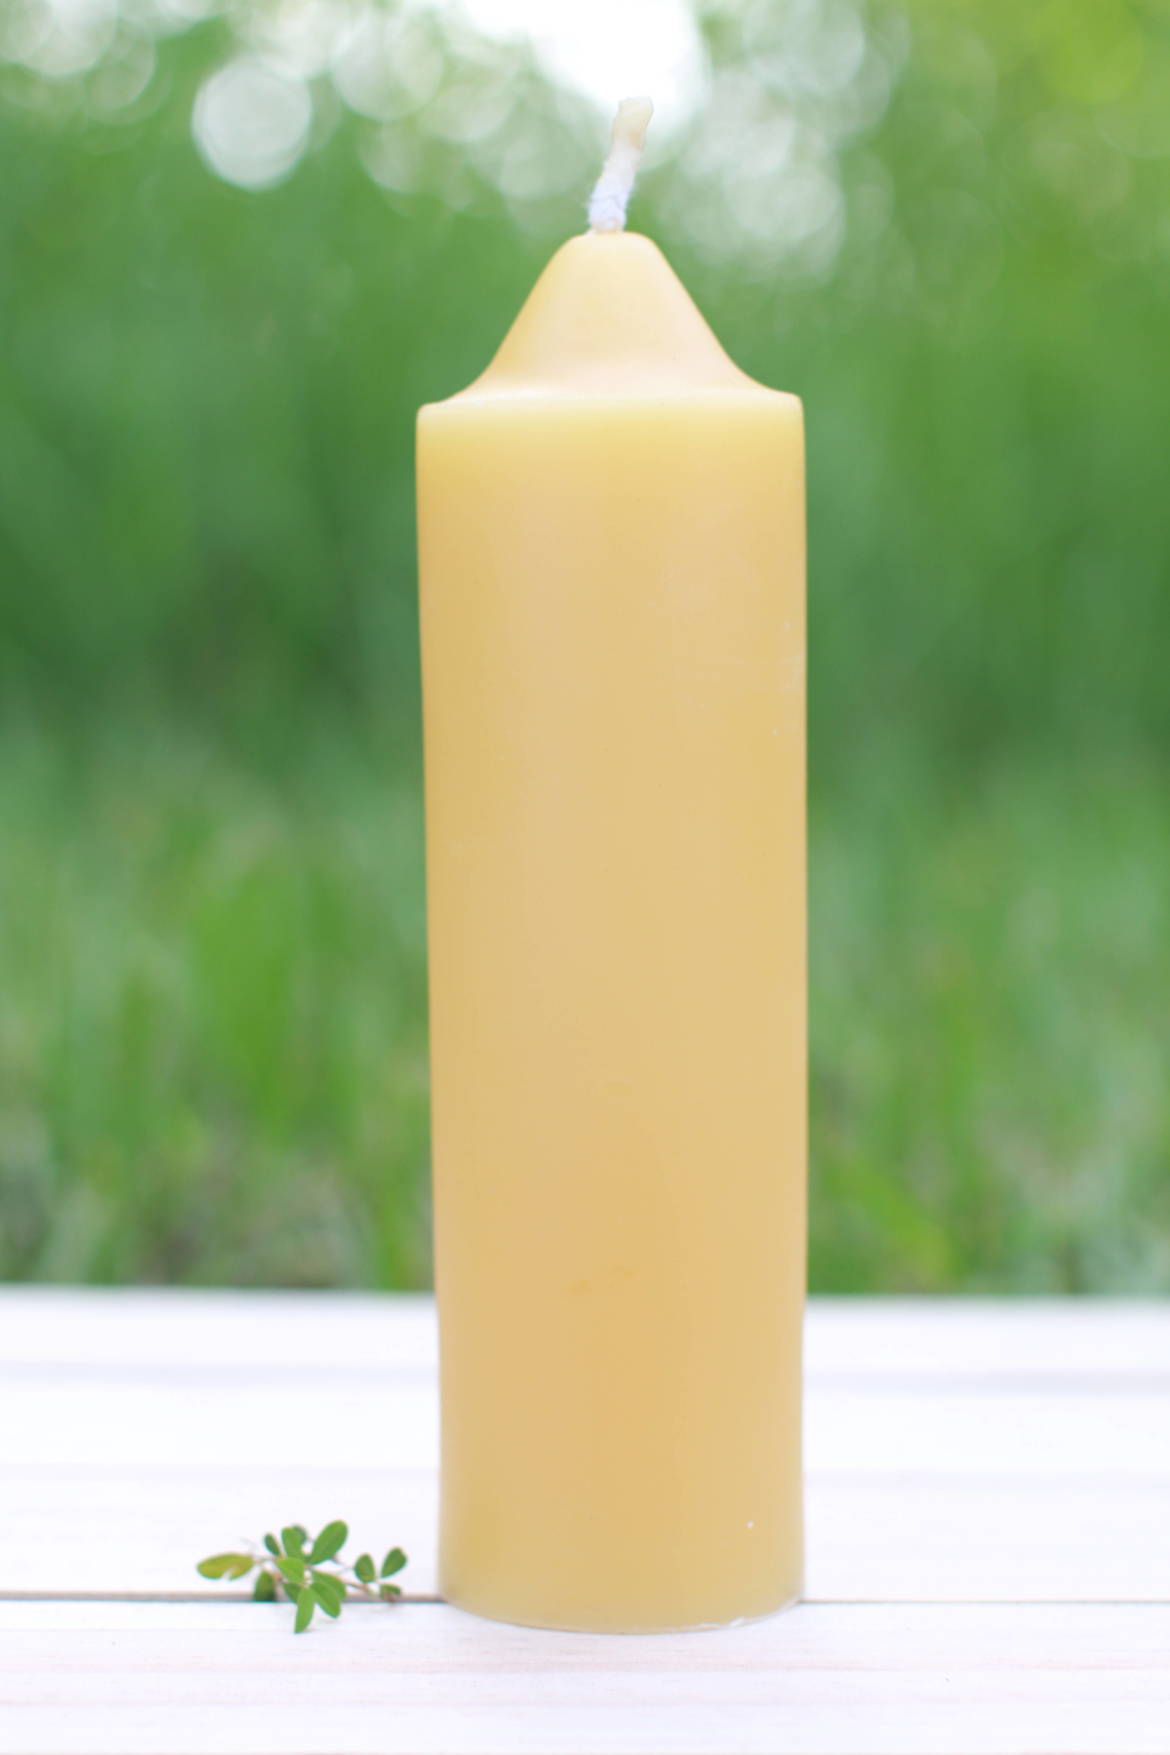 New-Beeswax-6.5_-Candle-e1503952029382.jpg